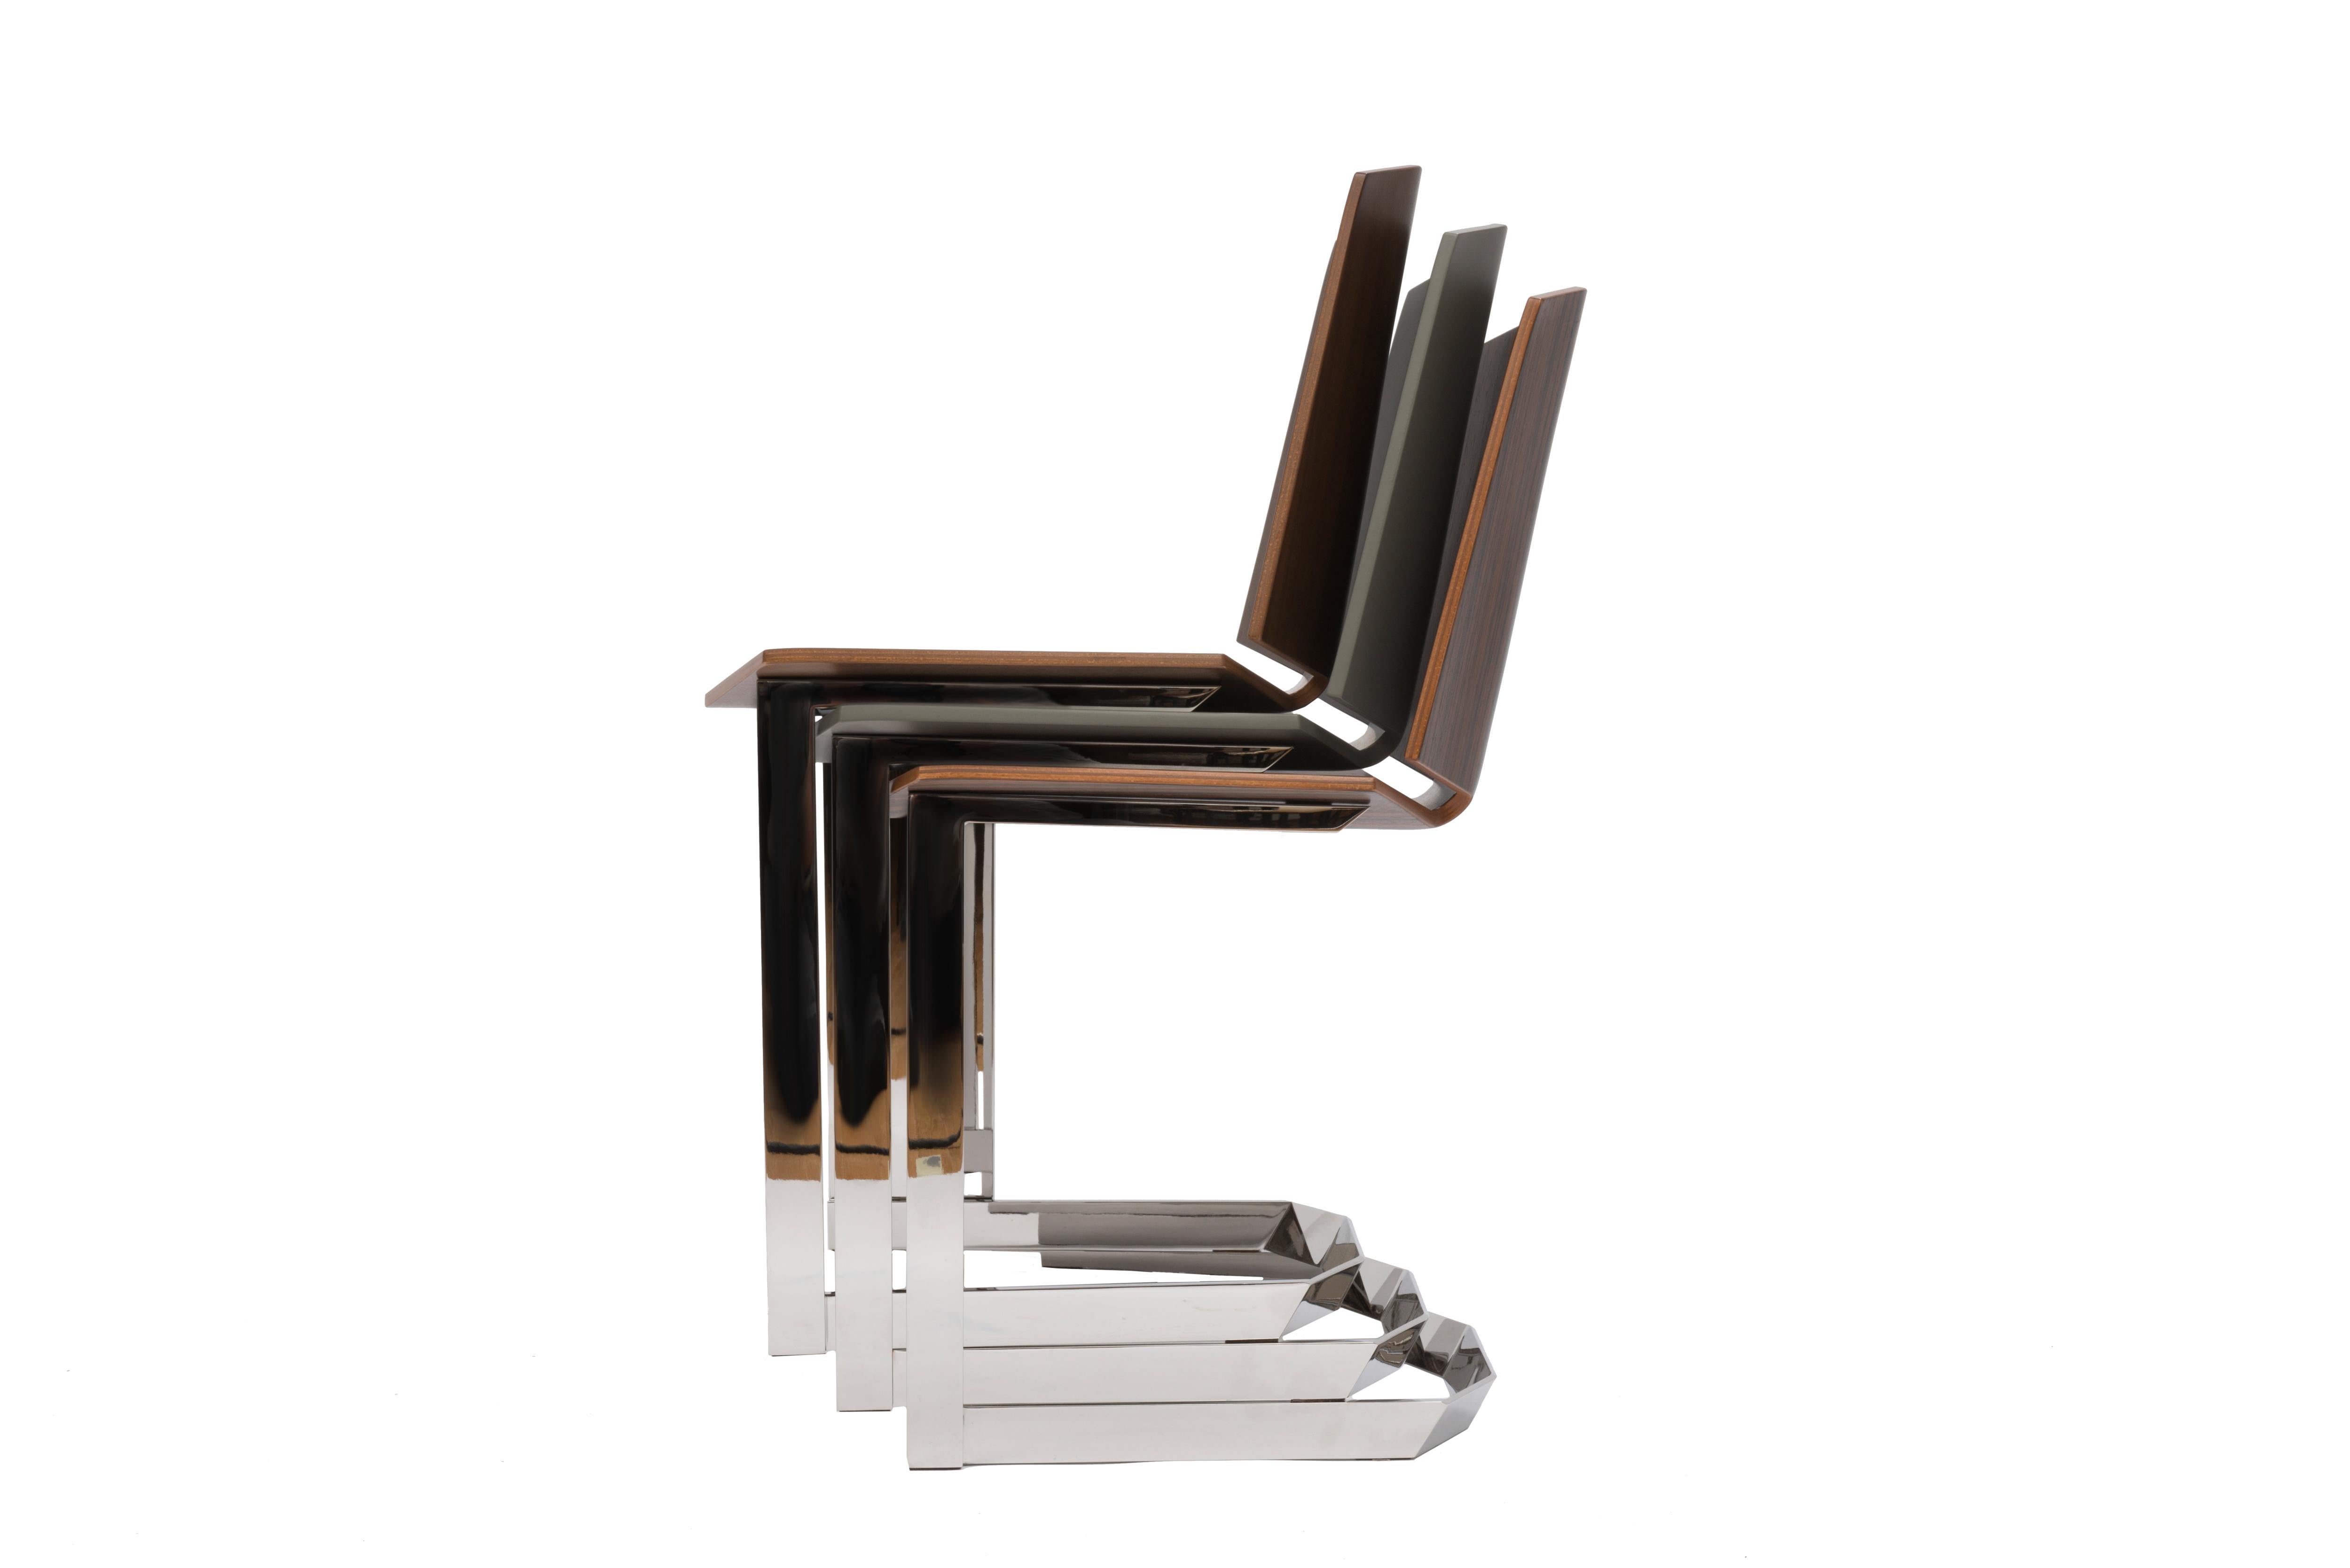 Donghia Rex Occasional Chair in Truffle Lacquer im Zustand „Neu“ im Angebot in New York, NY